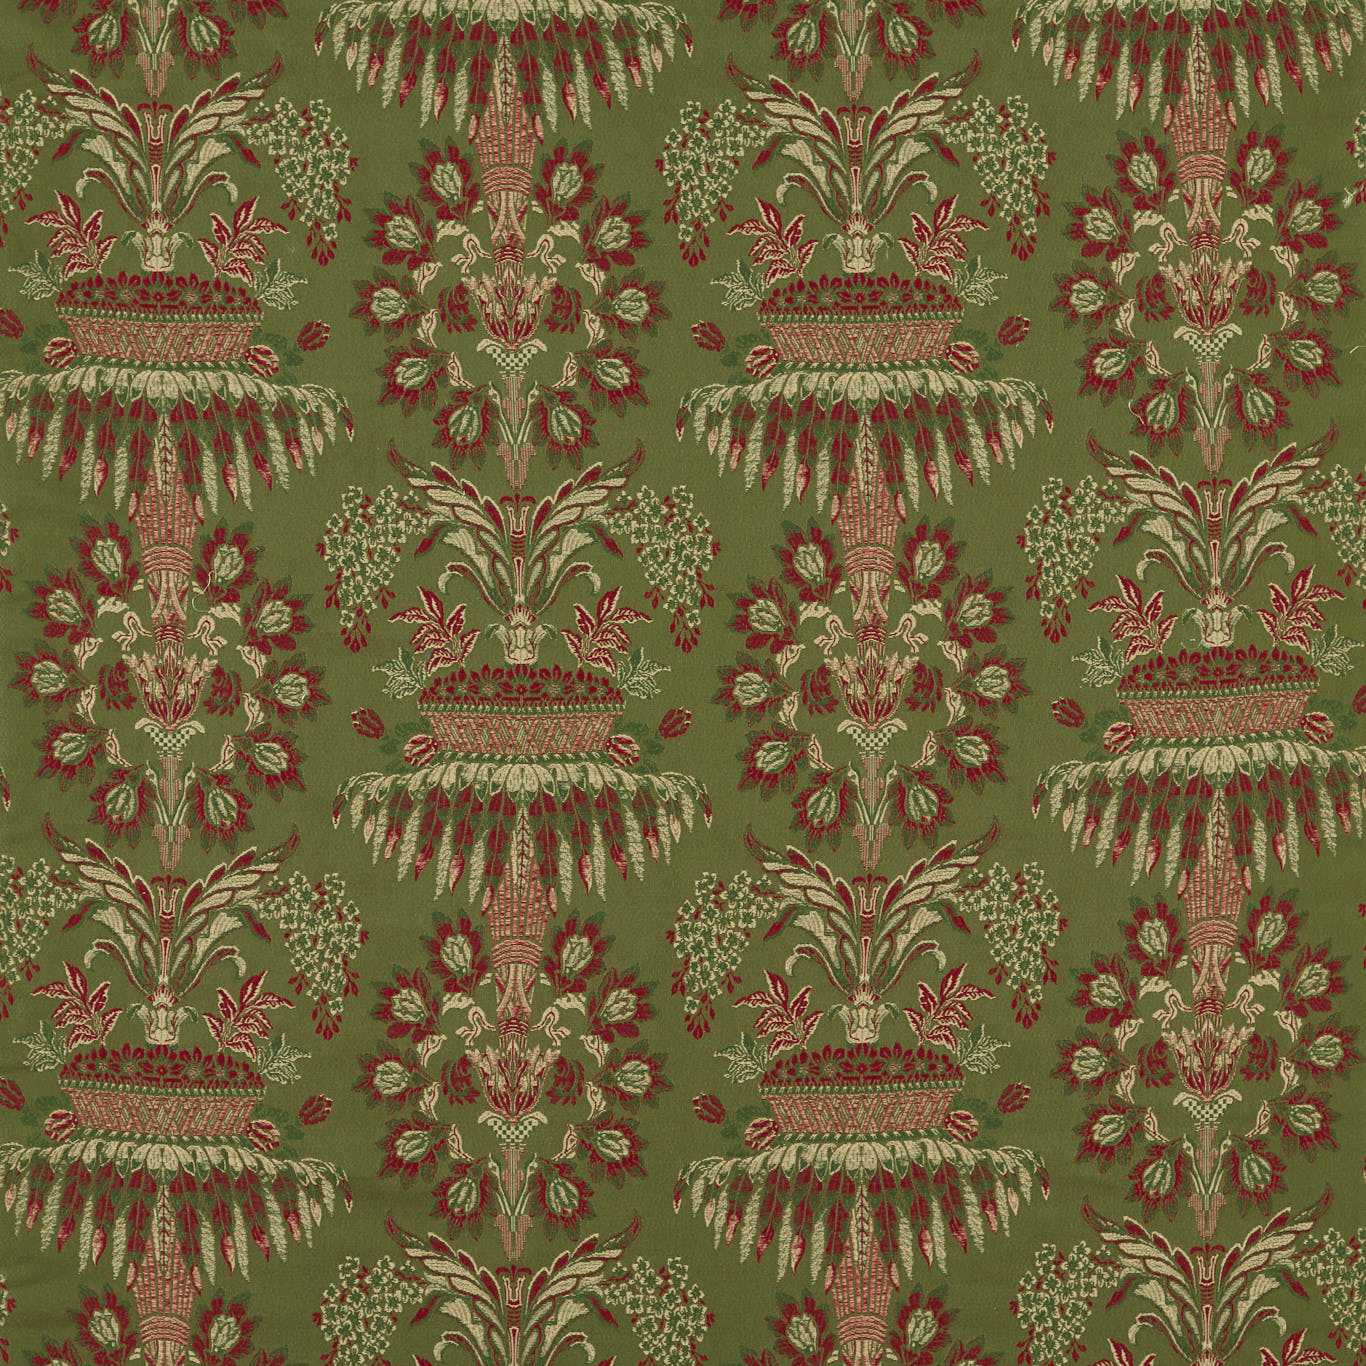 Long Gallery Brocade Olivine/Russet Fabric by ZOF